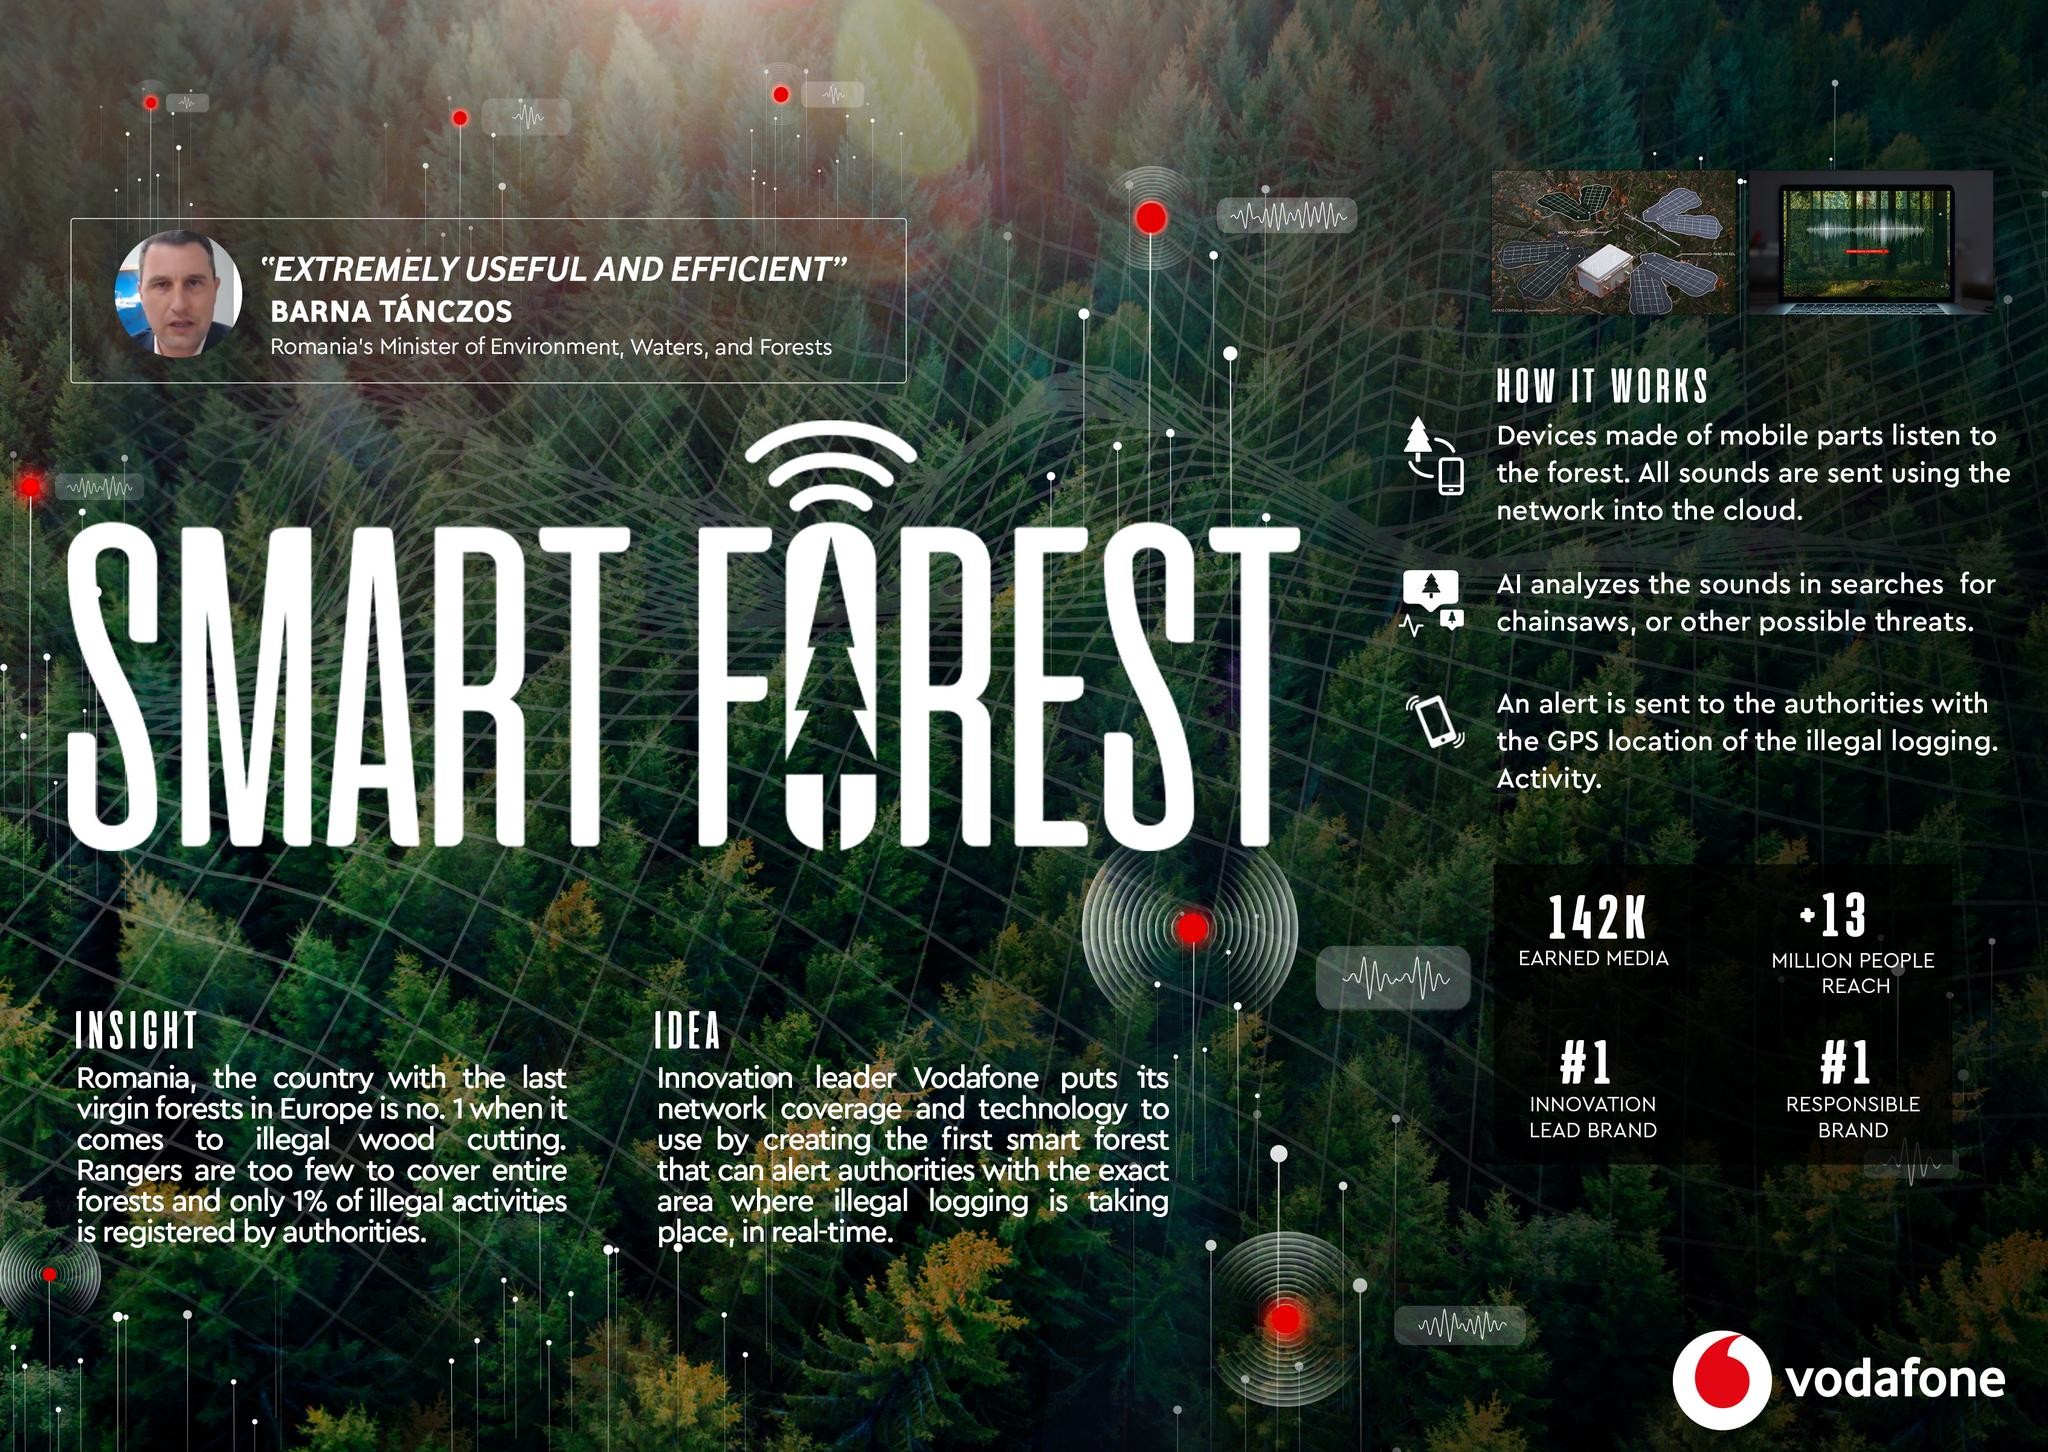 Smart Forest